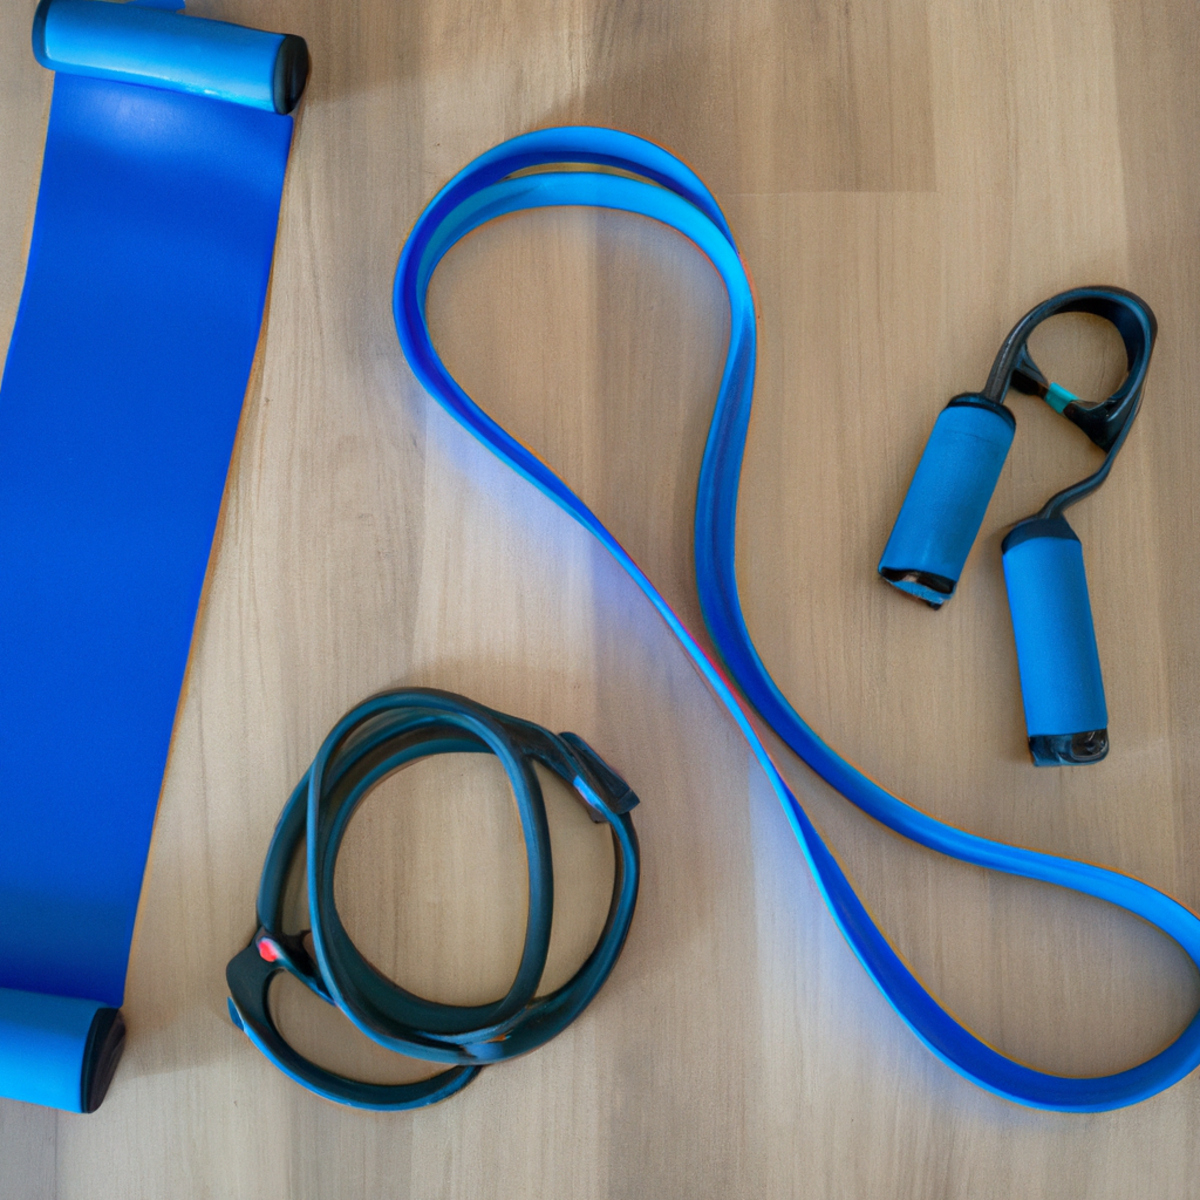 The photo depicts a neatly arranged set of workout equipment on a wooden floor. In the center of the frame, a resistance band is stretched taut between two sturdy metal handles. The band is a vibrant shade of blue, and its texture is visible in the photo, with small ridges running along its length. To the left of the band, a set of dumbbells is arranged in ascending order, with the smallest weight at the front and the largest at the back. The dumbbells are made of shiny metal and have black rubber grips. To the right of the band, a yoga mat is rolled out, its surface a deep purple color. The mat is slightly textured, with a pattern of small dots visible in the photo. In the background, a large window lets in natural light, casting a warm glow over the scene. The photo is inviting and suggests that the viewer could easily set up a similar workout space in their own home.